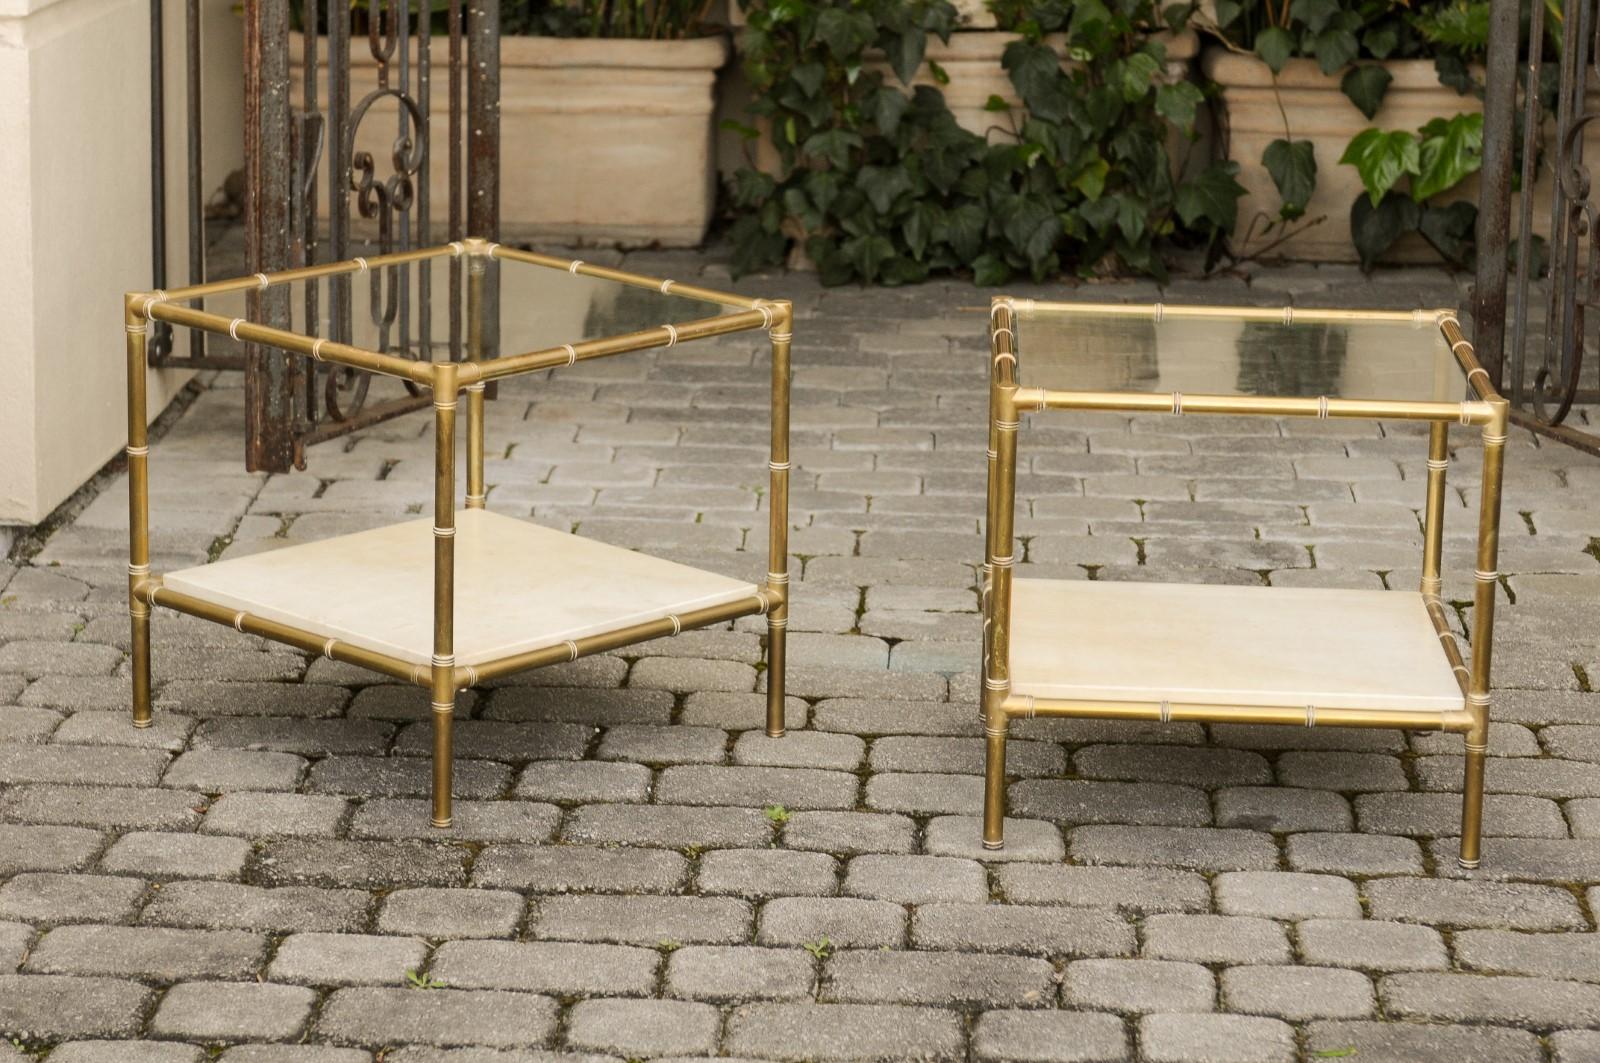 A pair of Italian brass side tables from the mid-20th century, with glass top and vellum shelf. Born in Italy during the midcentury period, each of this pair of stylish side tables features a brass bamboo-inspired structure, securing a glass top and